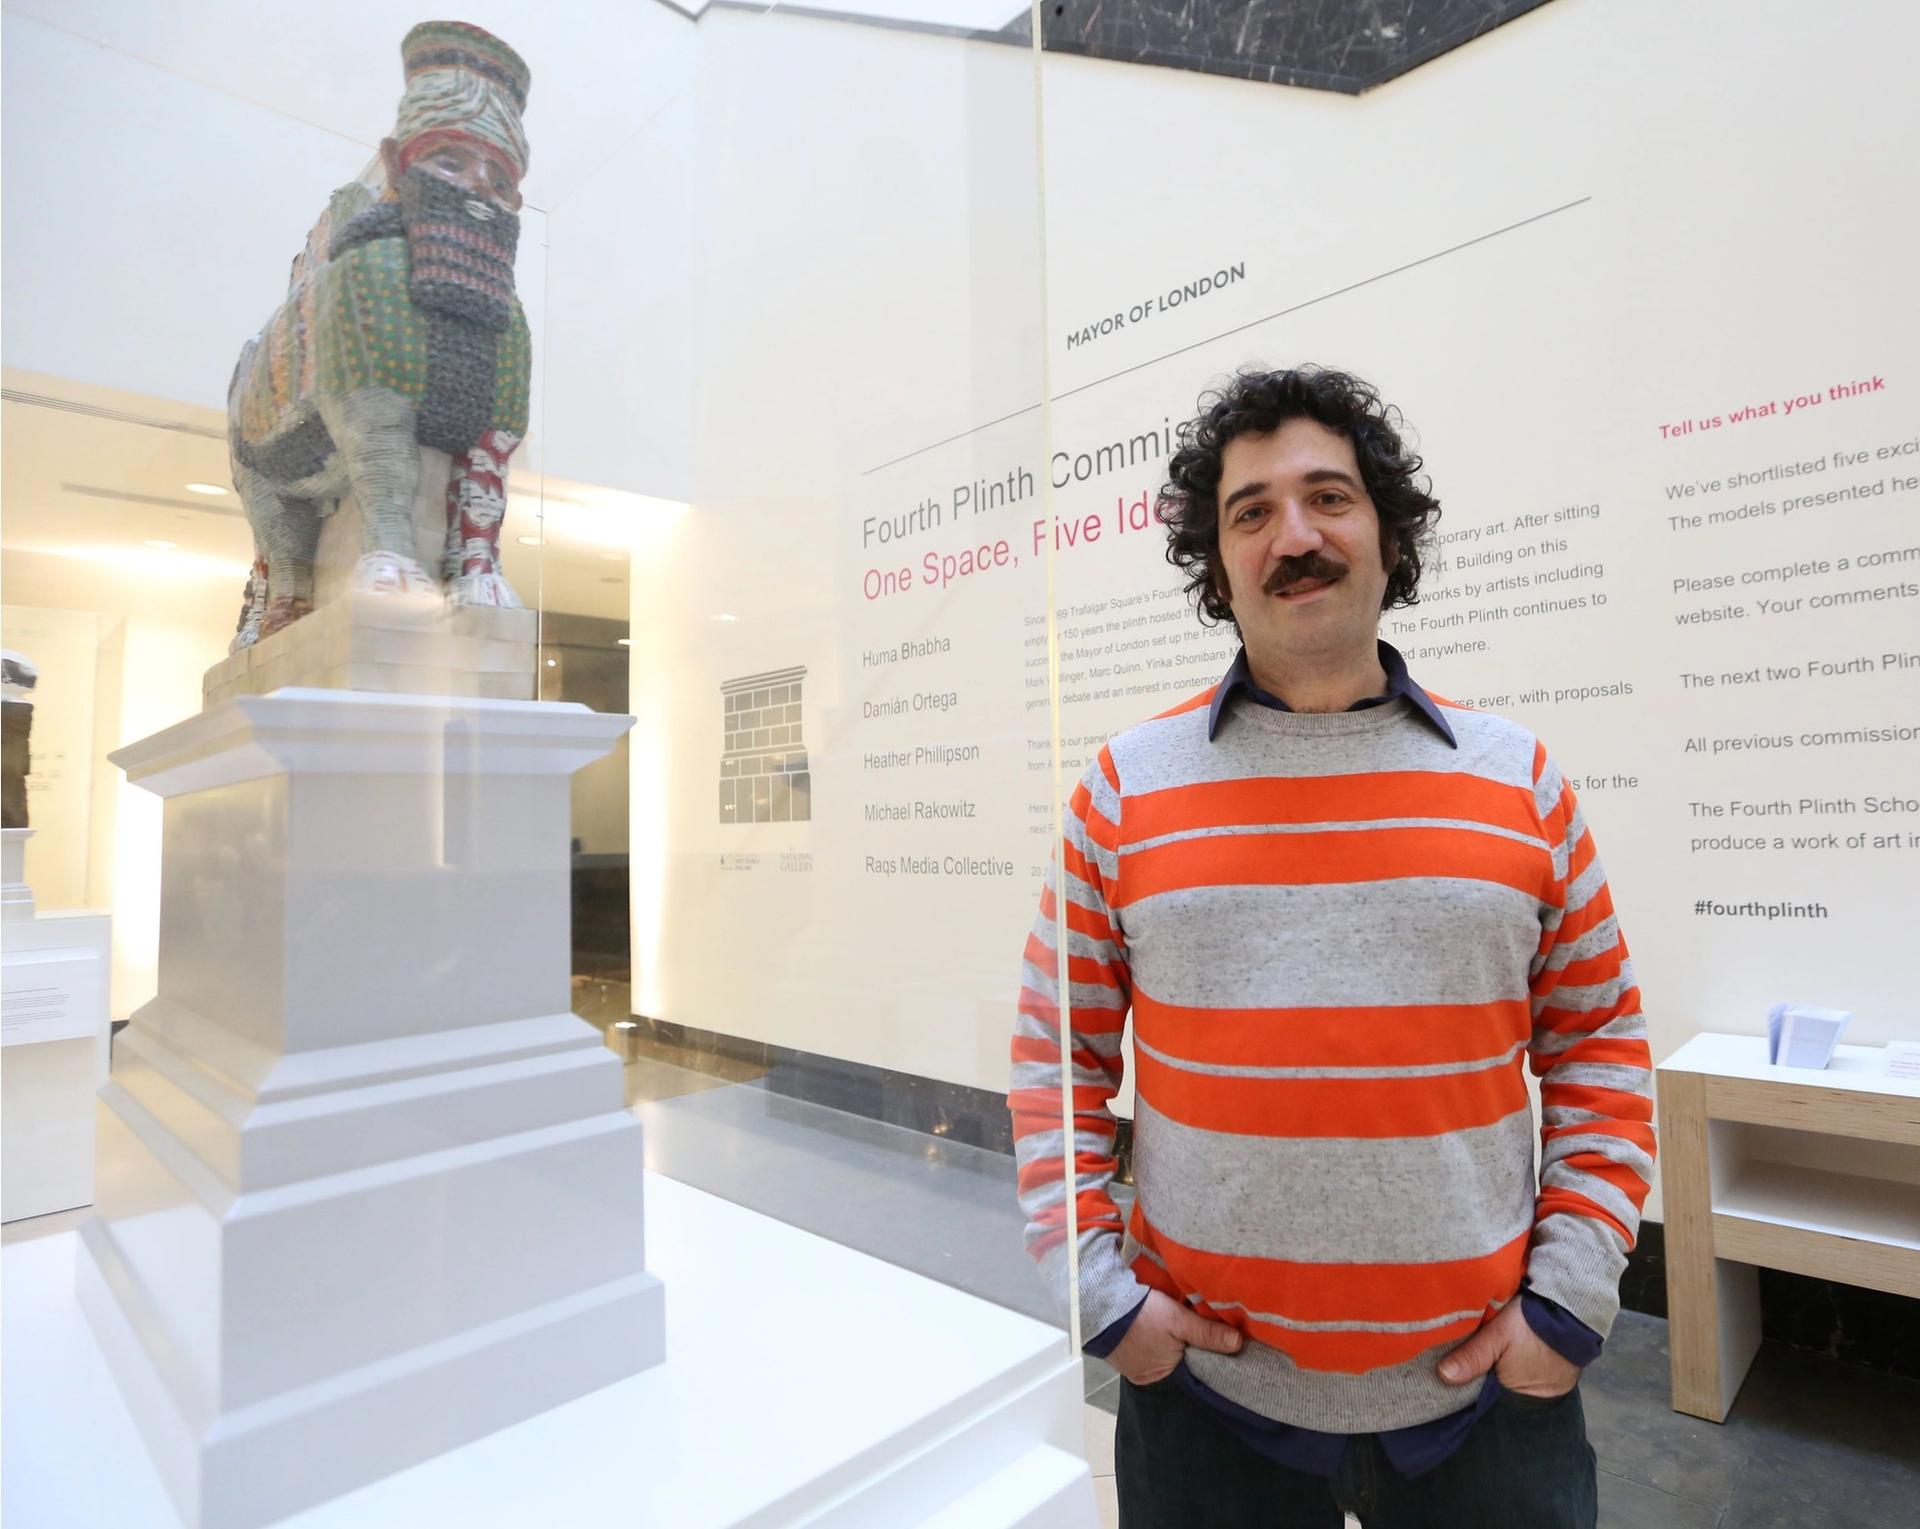 Michael Rakowitz, seen here next to a model of his Fourth Plinth public sculpture commission which is currently on show in London’s Trafalgar Square, has declined to participate in this year's Whitney Biennial Photo: James O Jenkins.